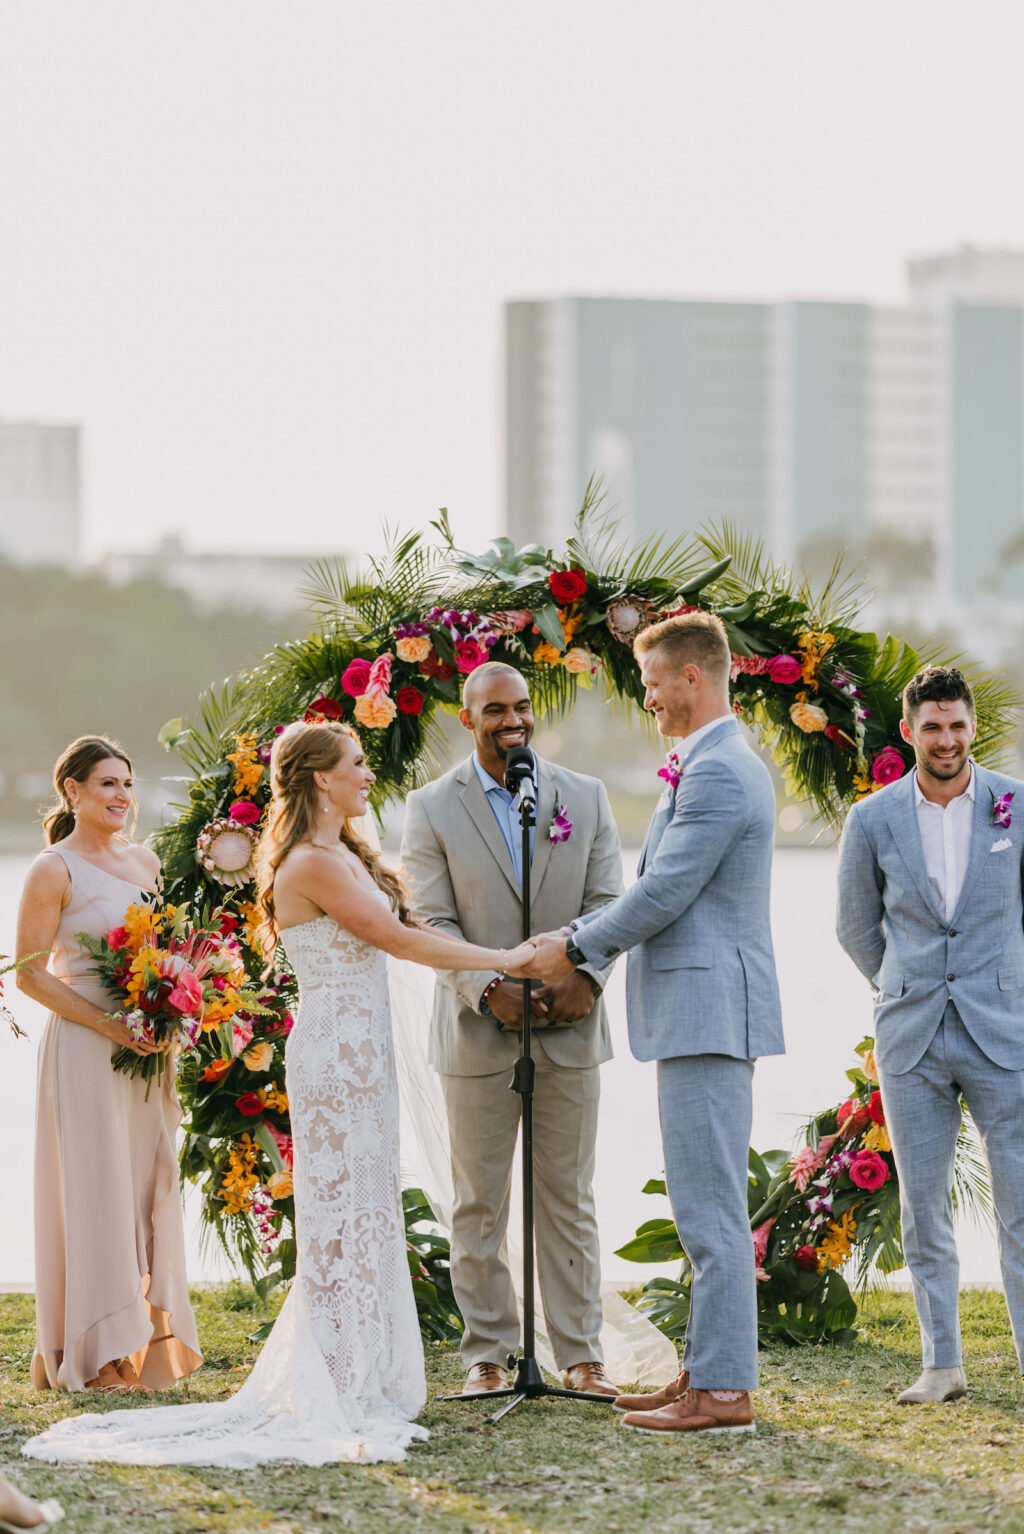 Bride and Groom Exchanging Wedding Vows During Waterfront Tropical Wedding Ceremony Decor, Circular Colorful Floral Arch | Tampa Bay Wedding Photographer Amber McWhorter Photography